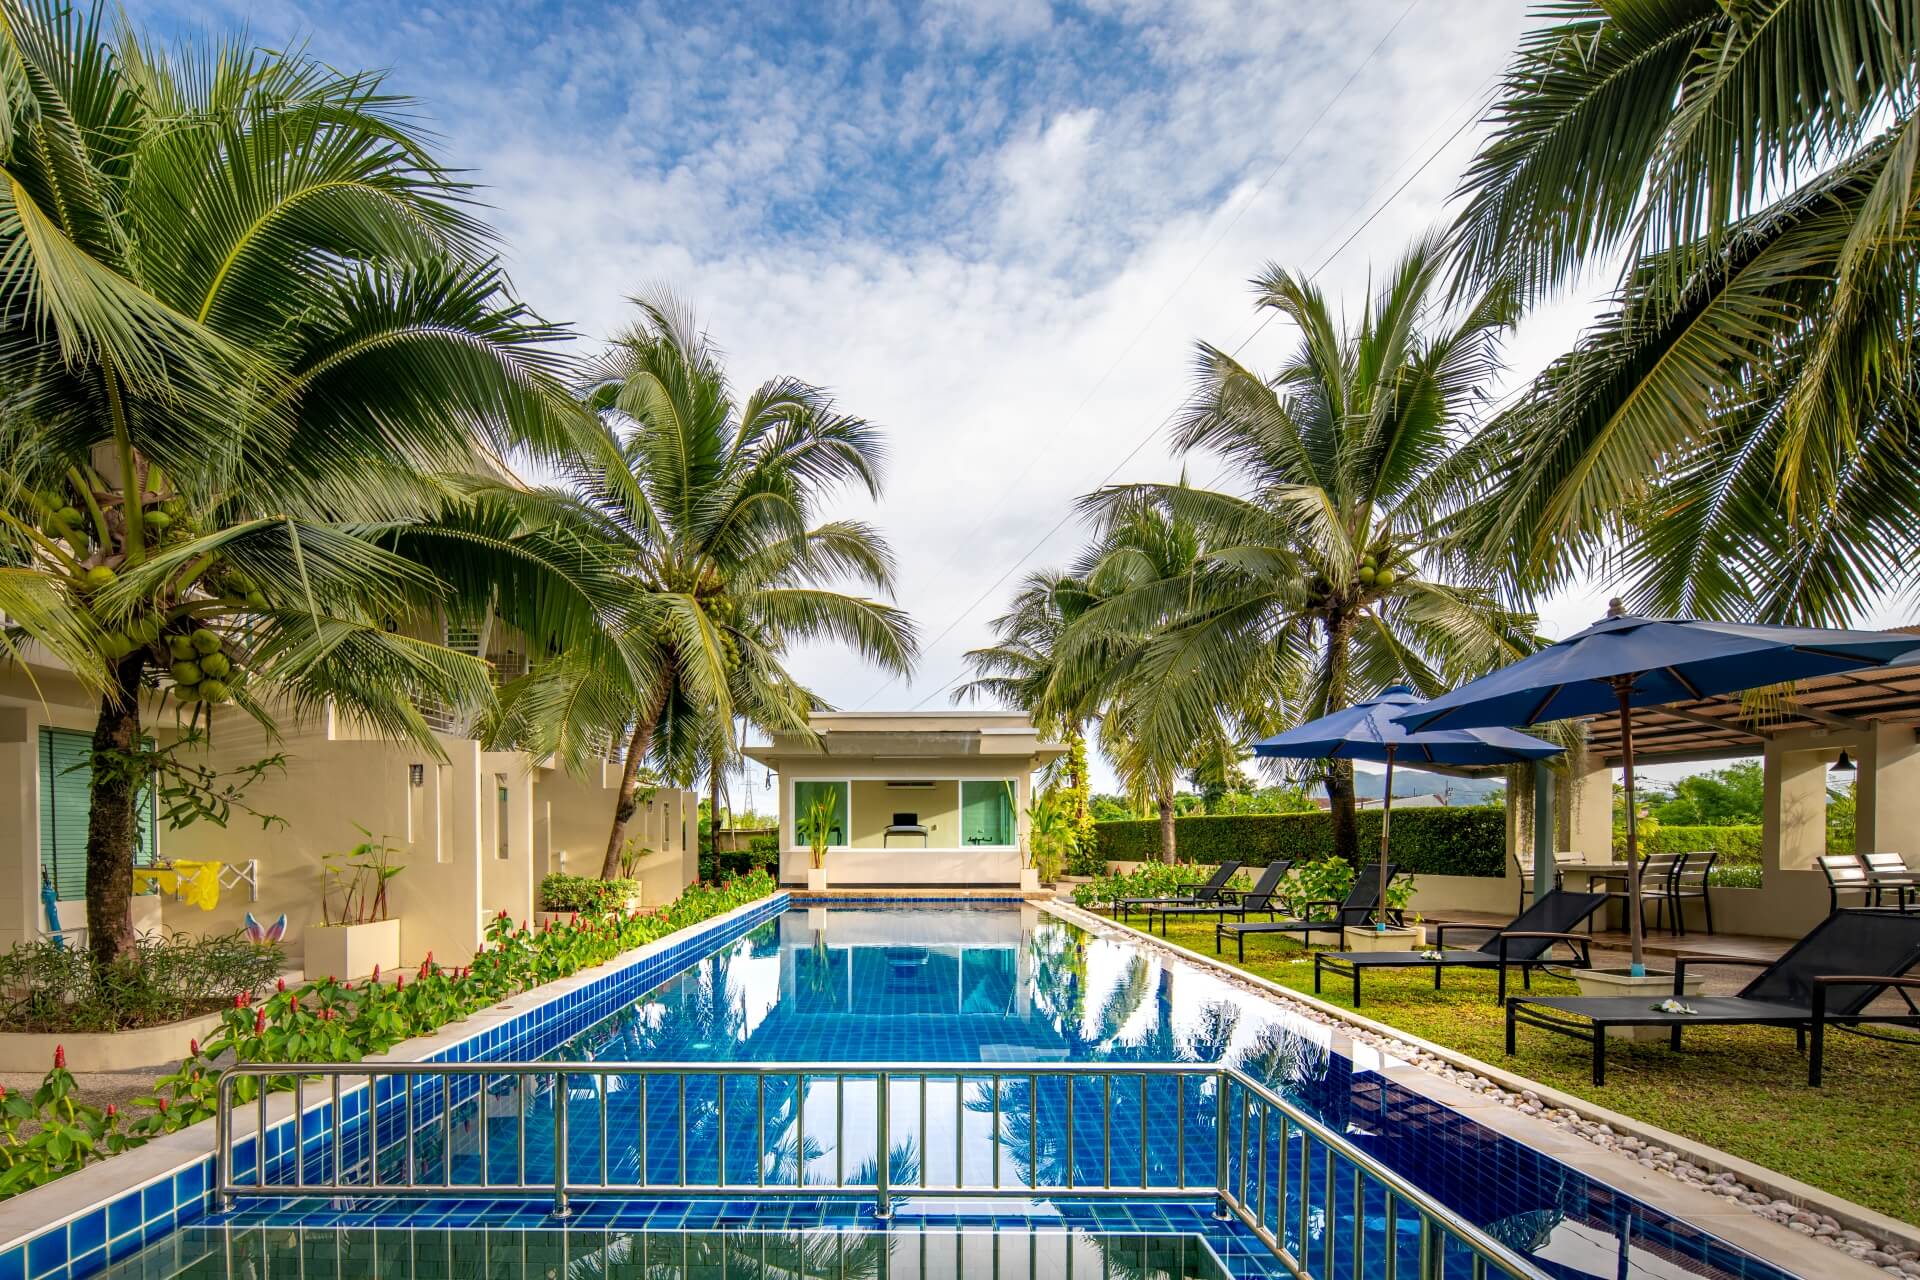 A swimming pool surround with coconut trees